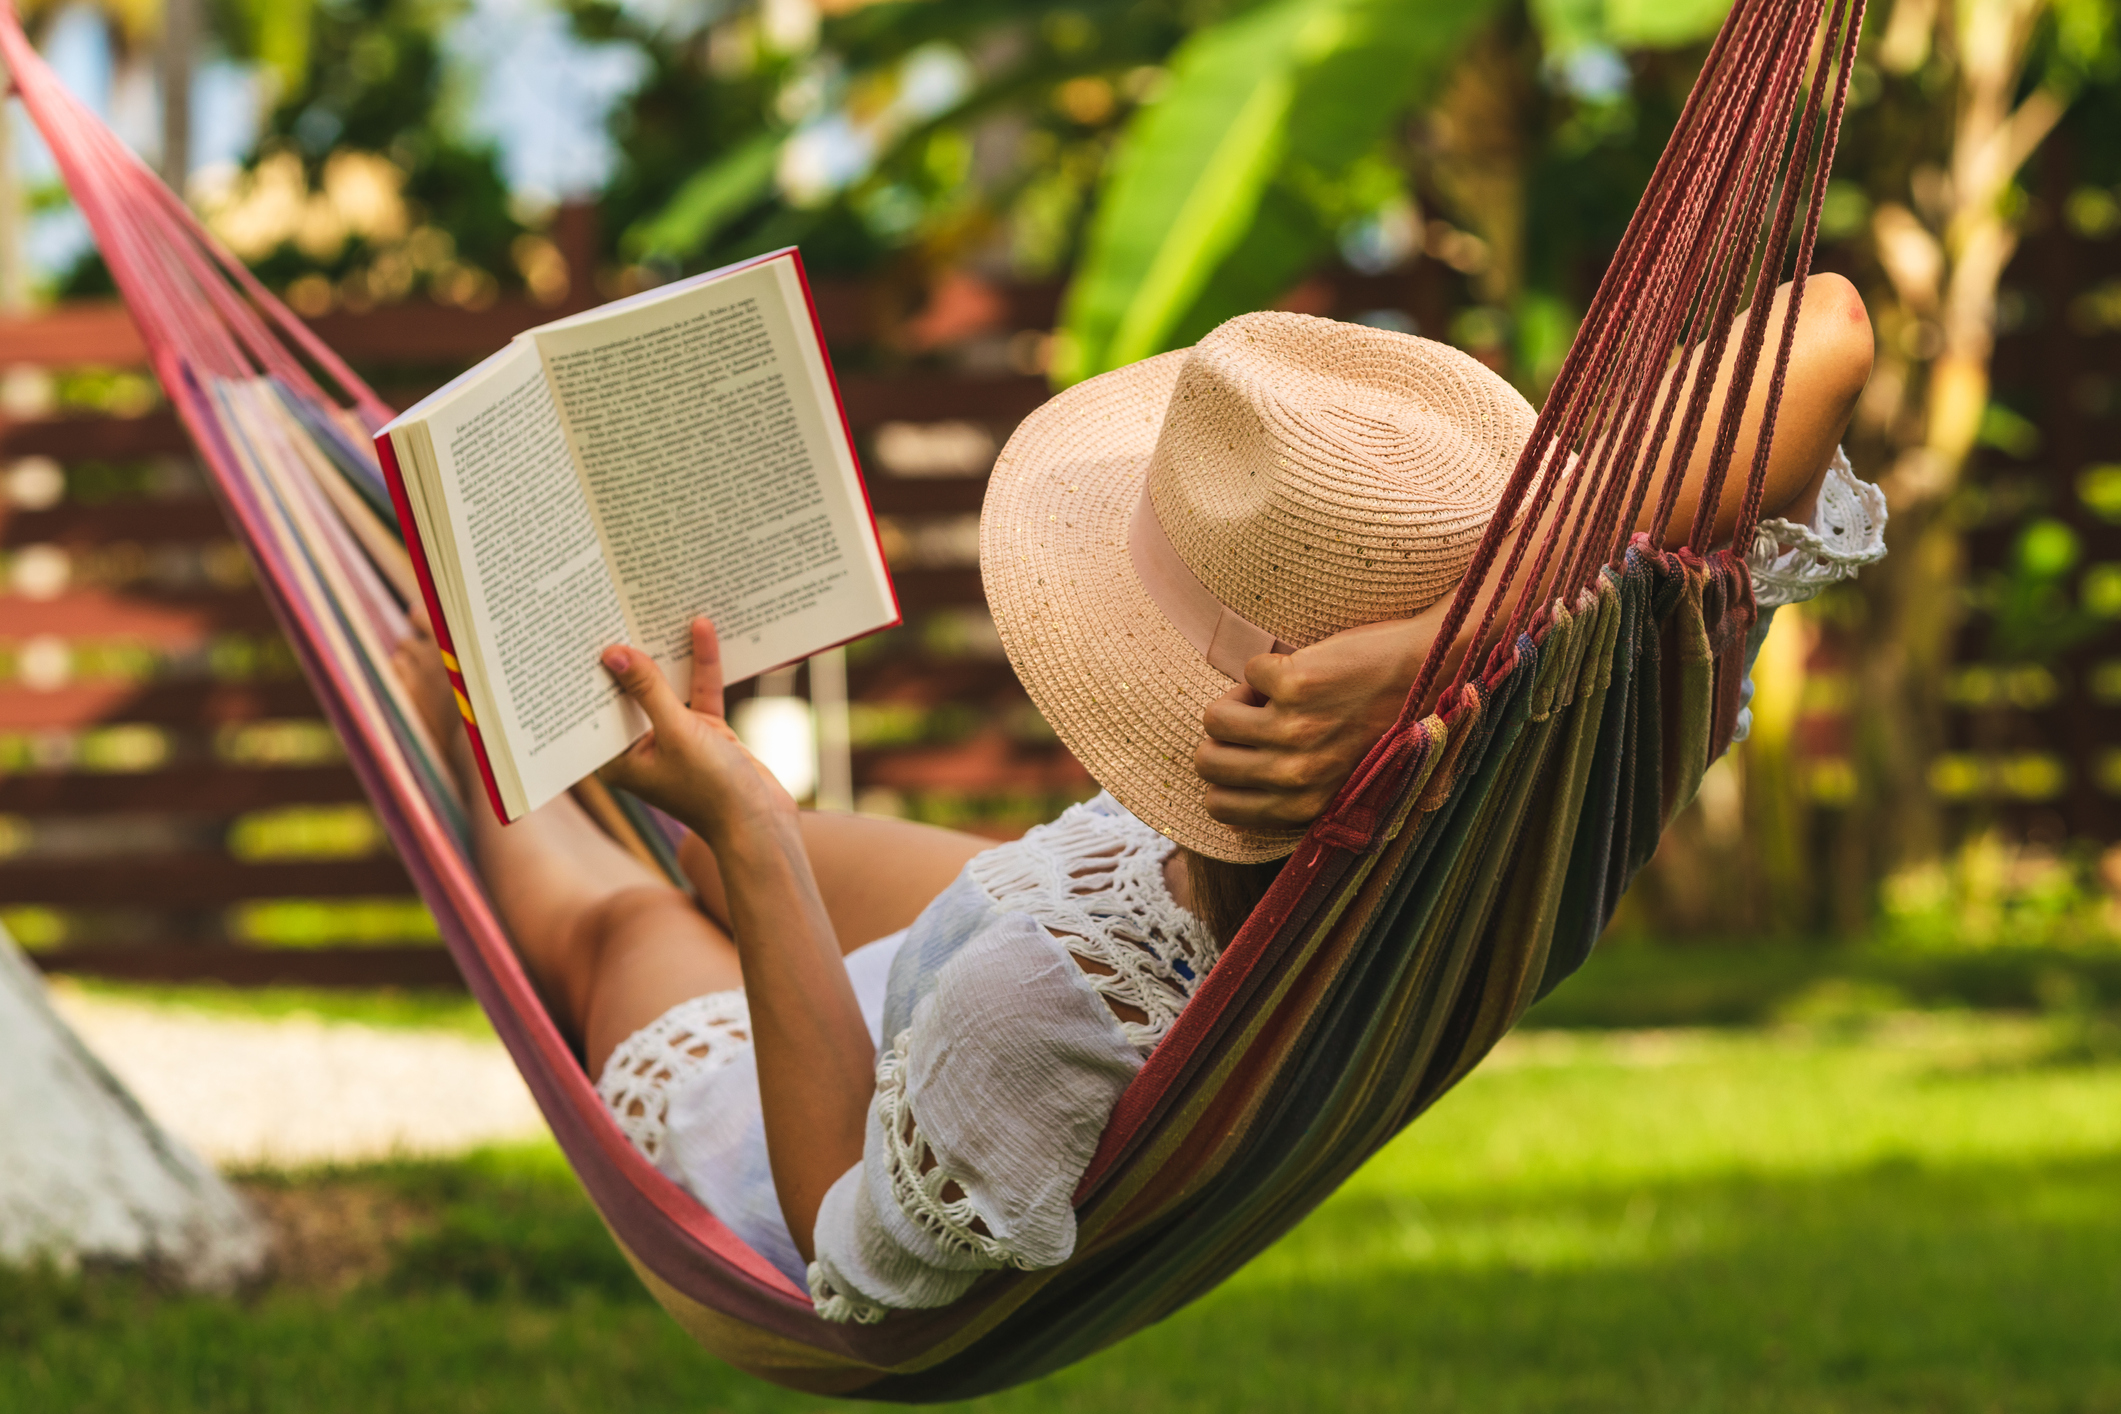 The sizzling hot summer continues: Top books as handpicked from our Rockgas Team